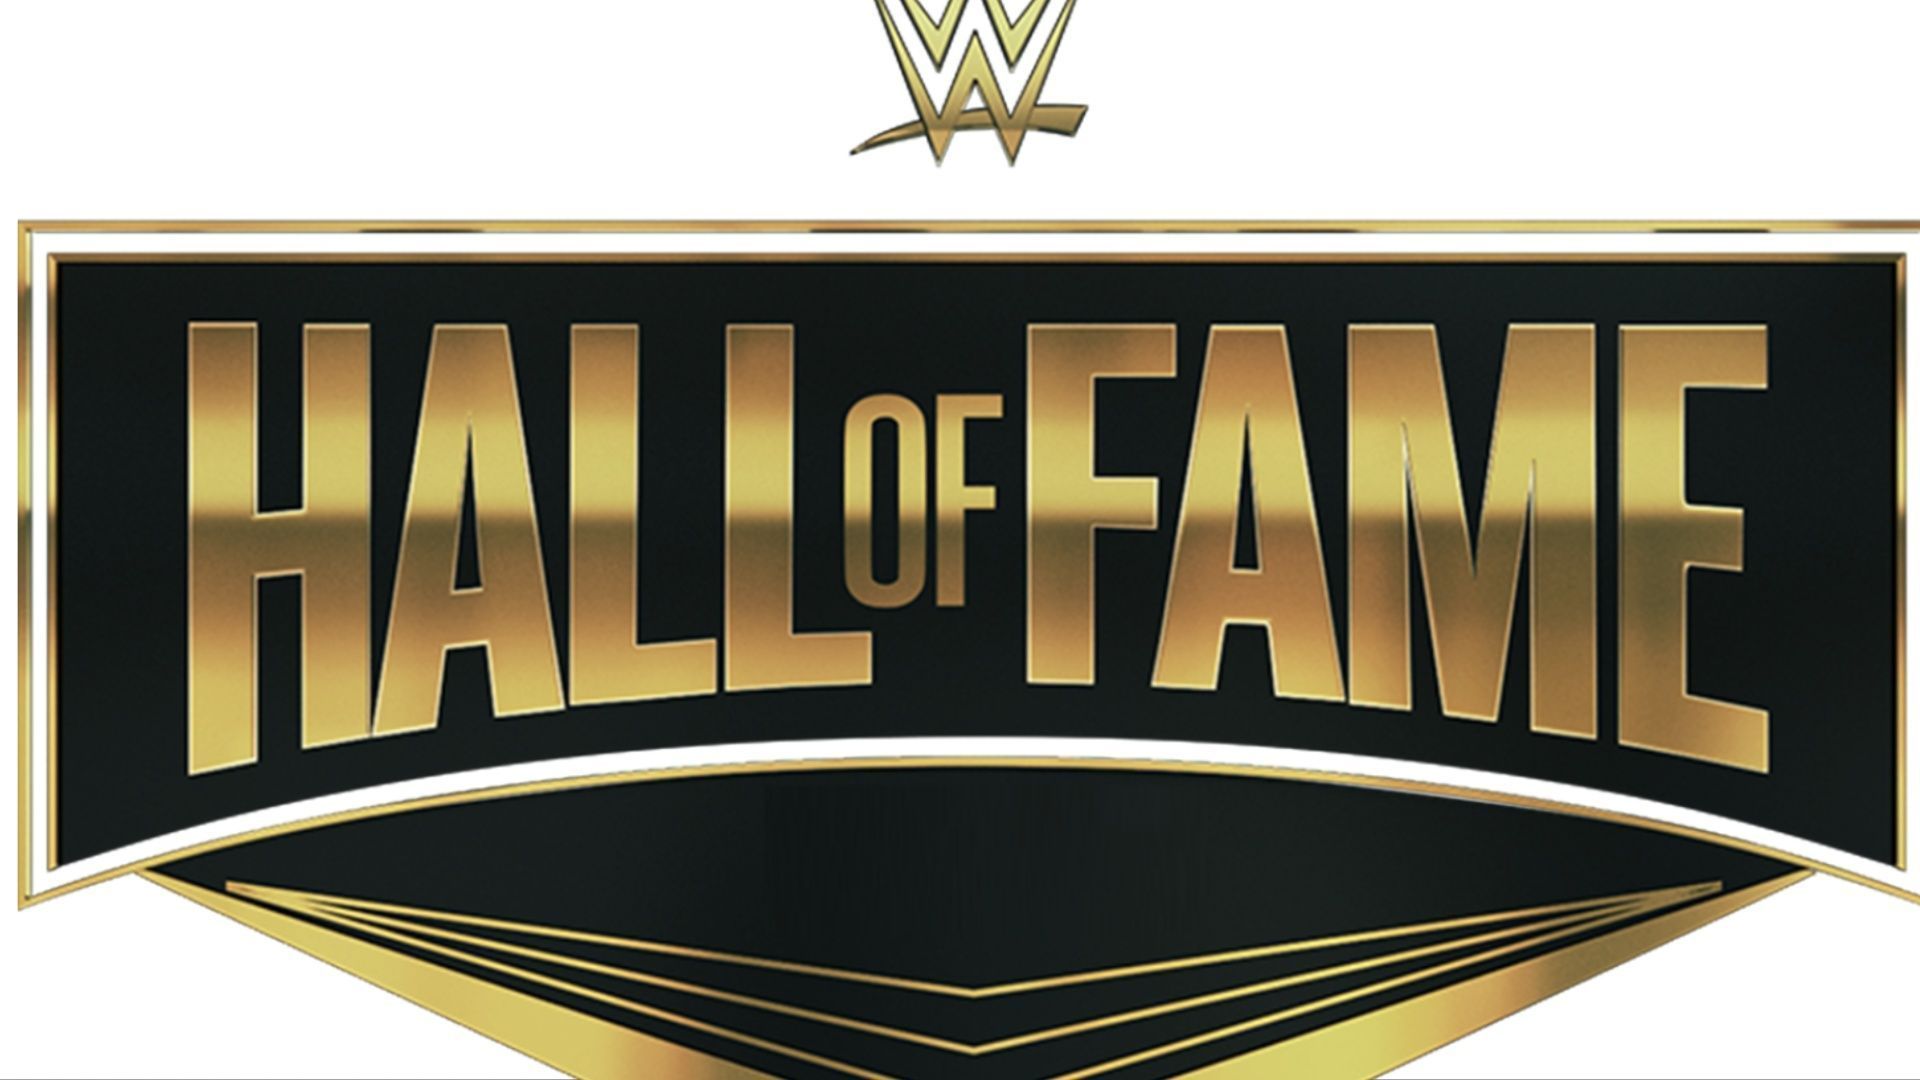 WWE Hall of Fame is a yearly tradition celebrating the life and times of superstars.